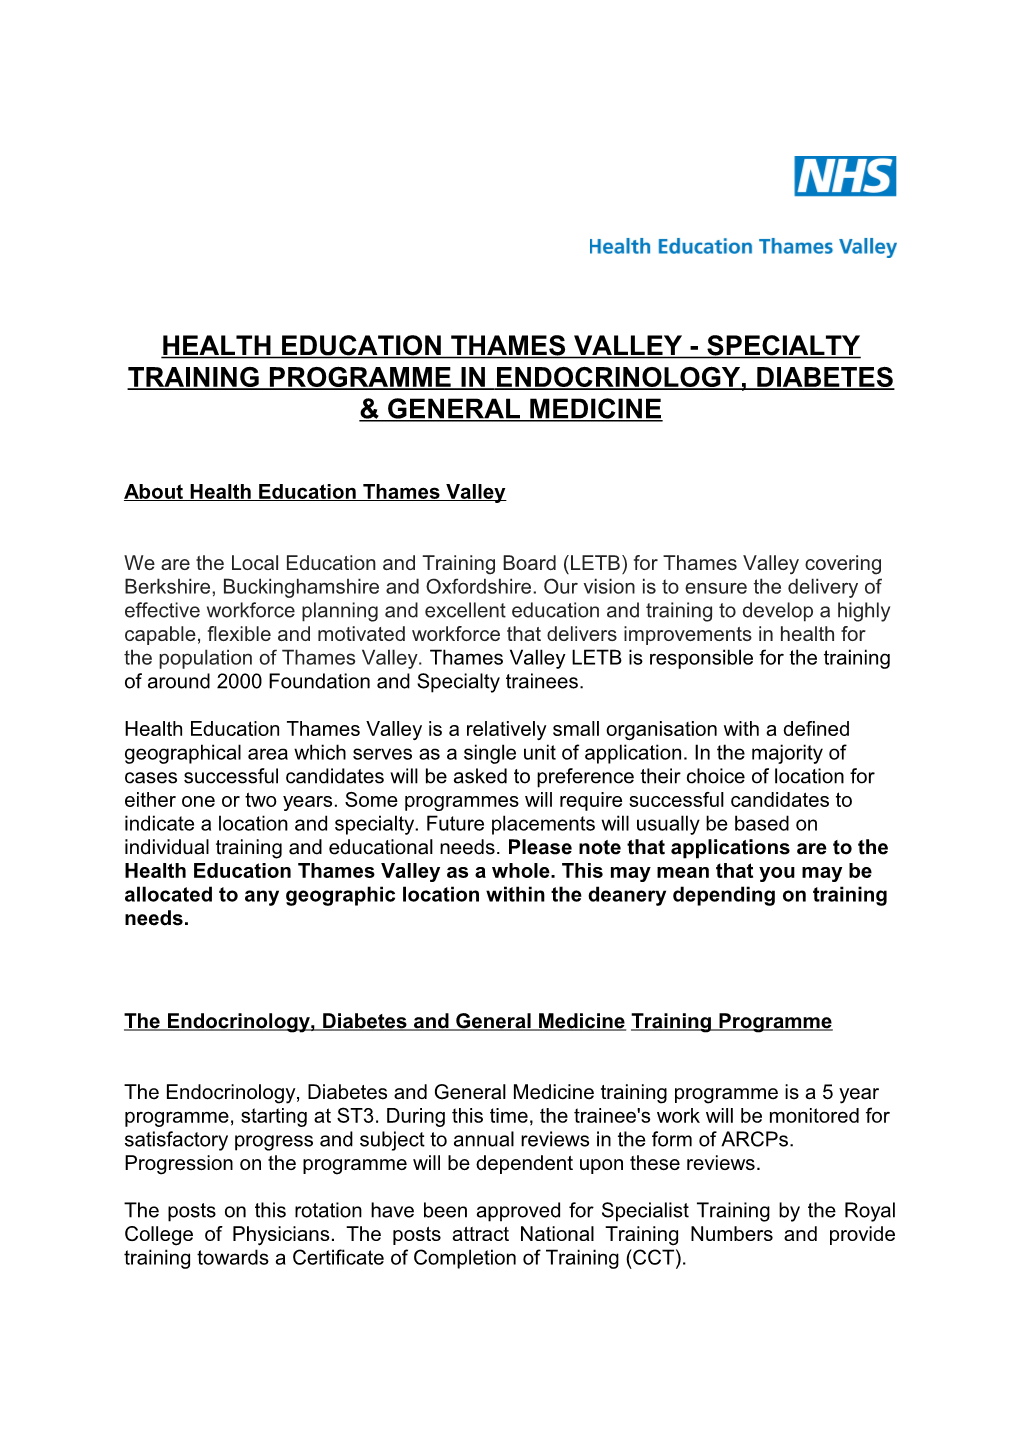 Health Education Thames Valley - Specialty Training Programme in Endocrinology, Diabetes